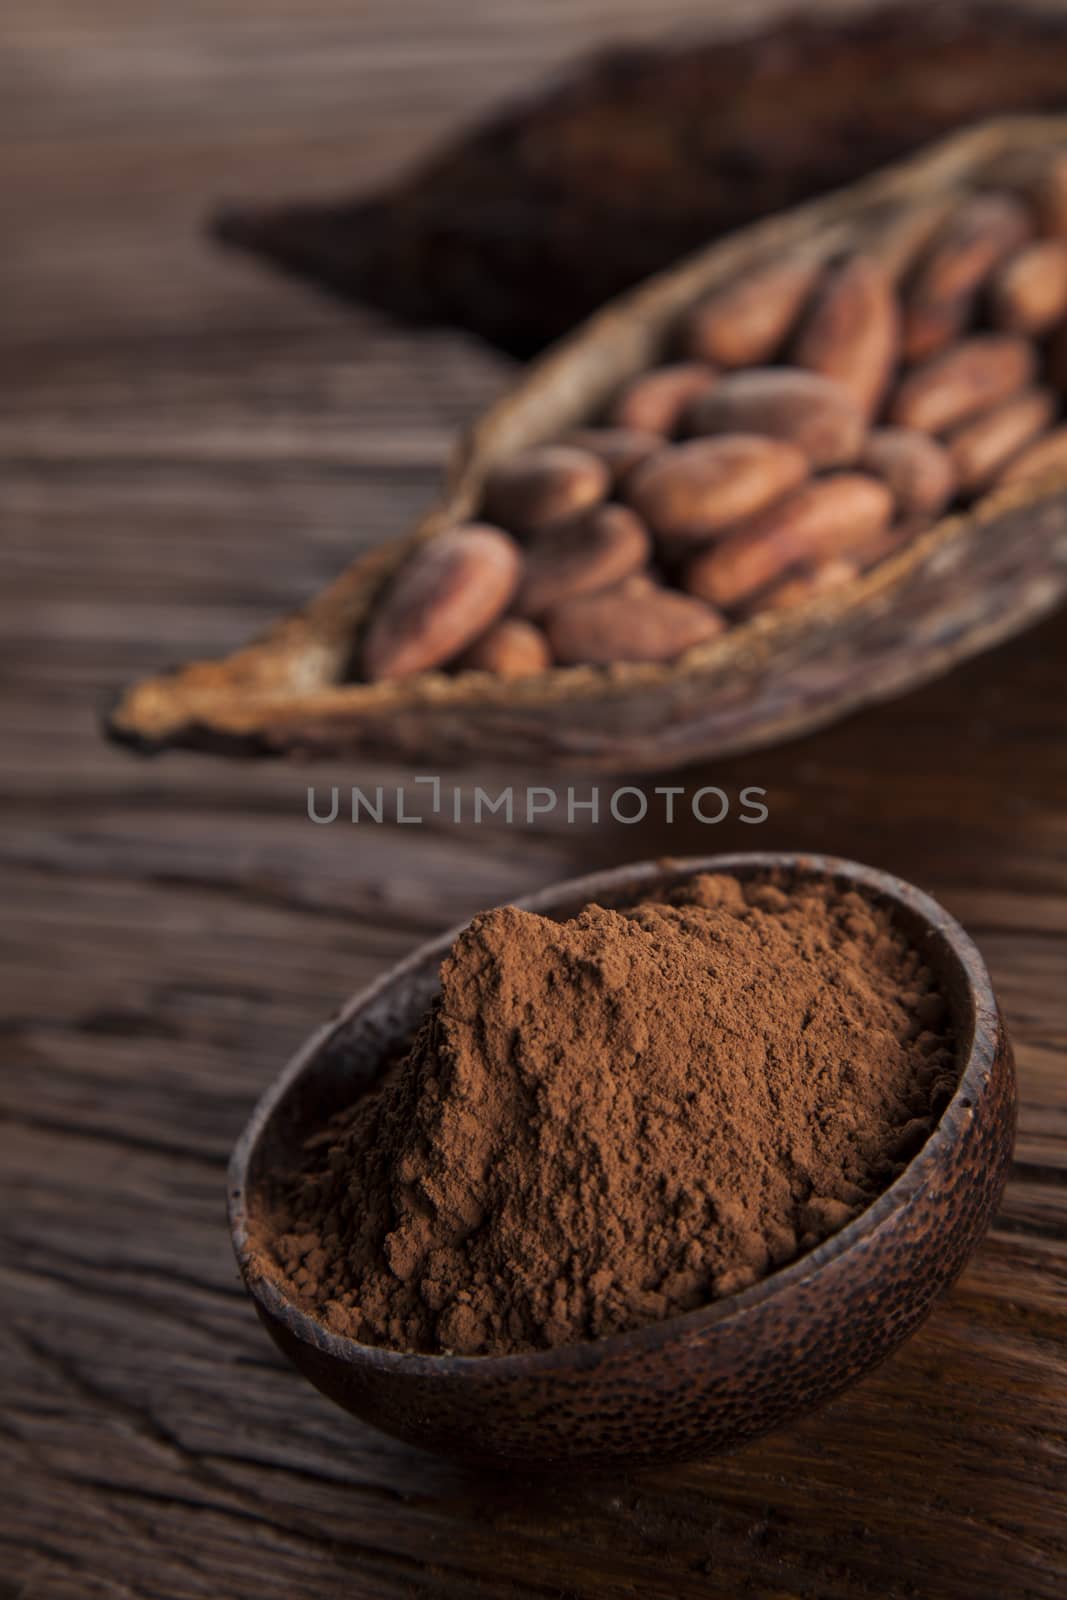 Cocoa beans in the dry cocoa pod fruit on wooden background